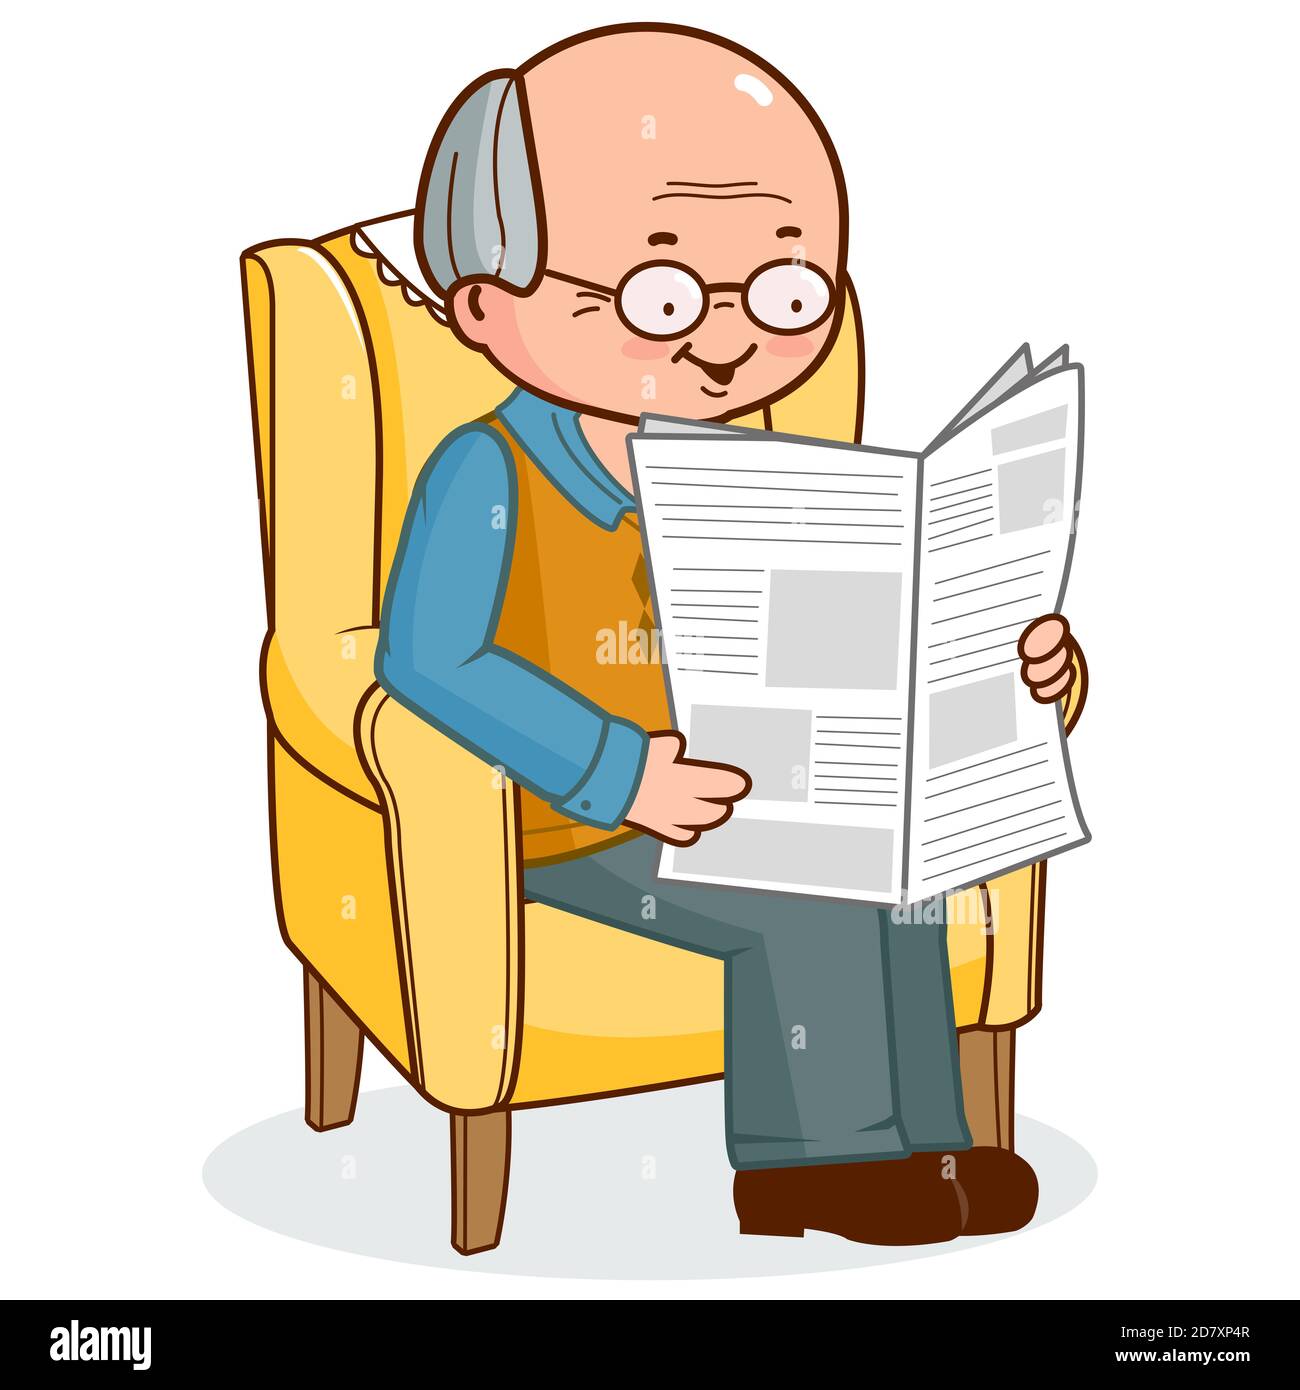 Old man sitting in an armchair reading the news. Stock Photo